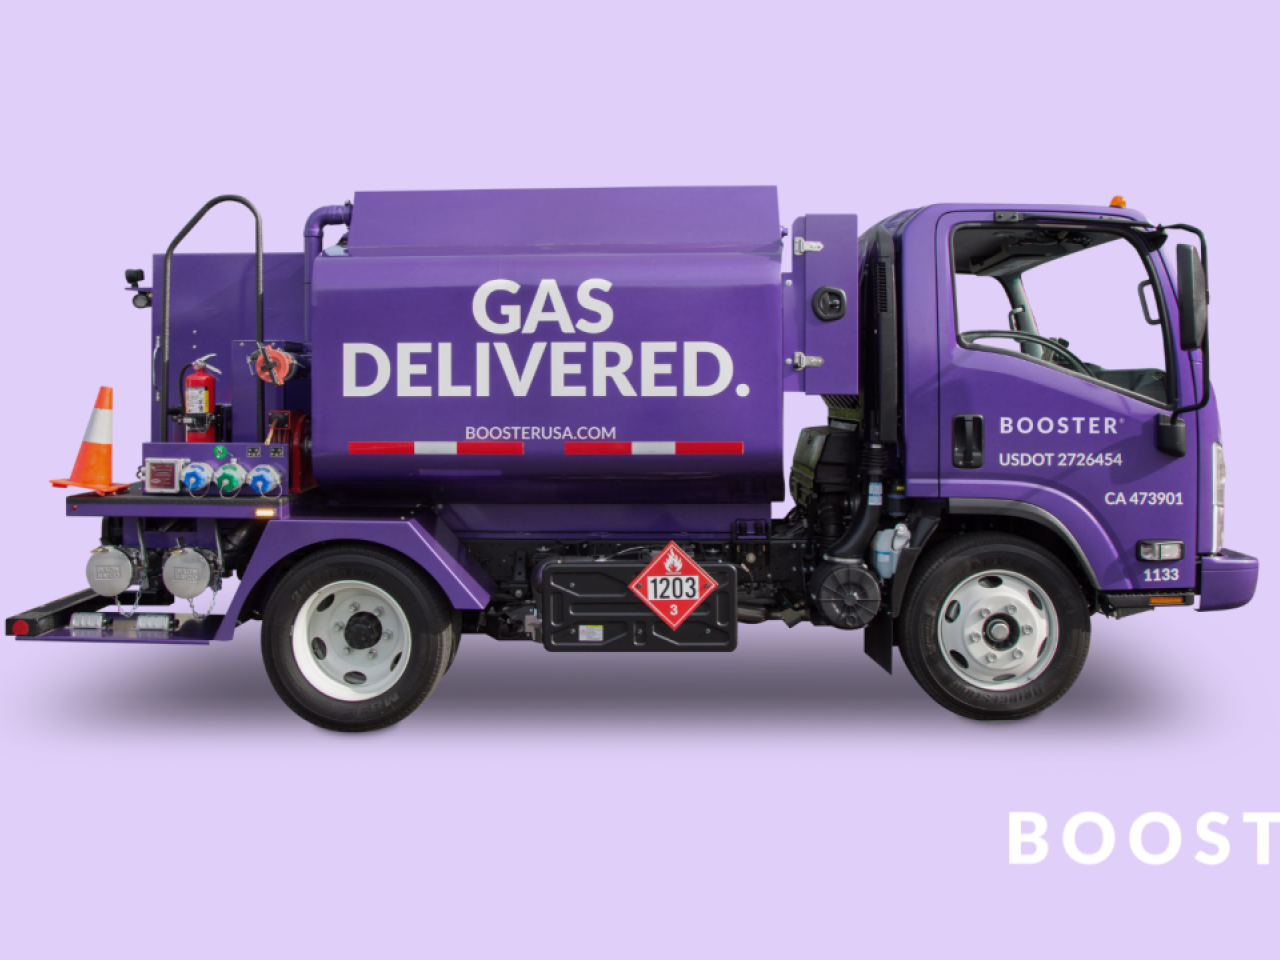 A photo of a Booster smart tanker floats on a light purple background.